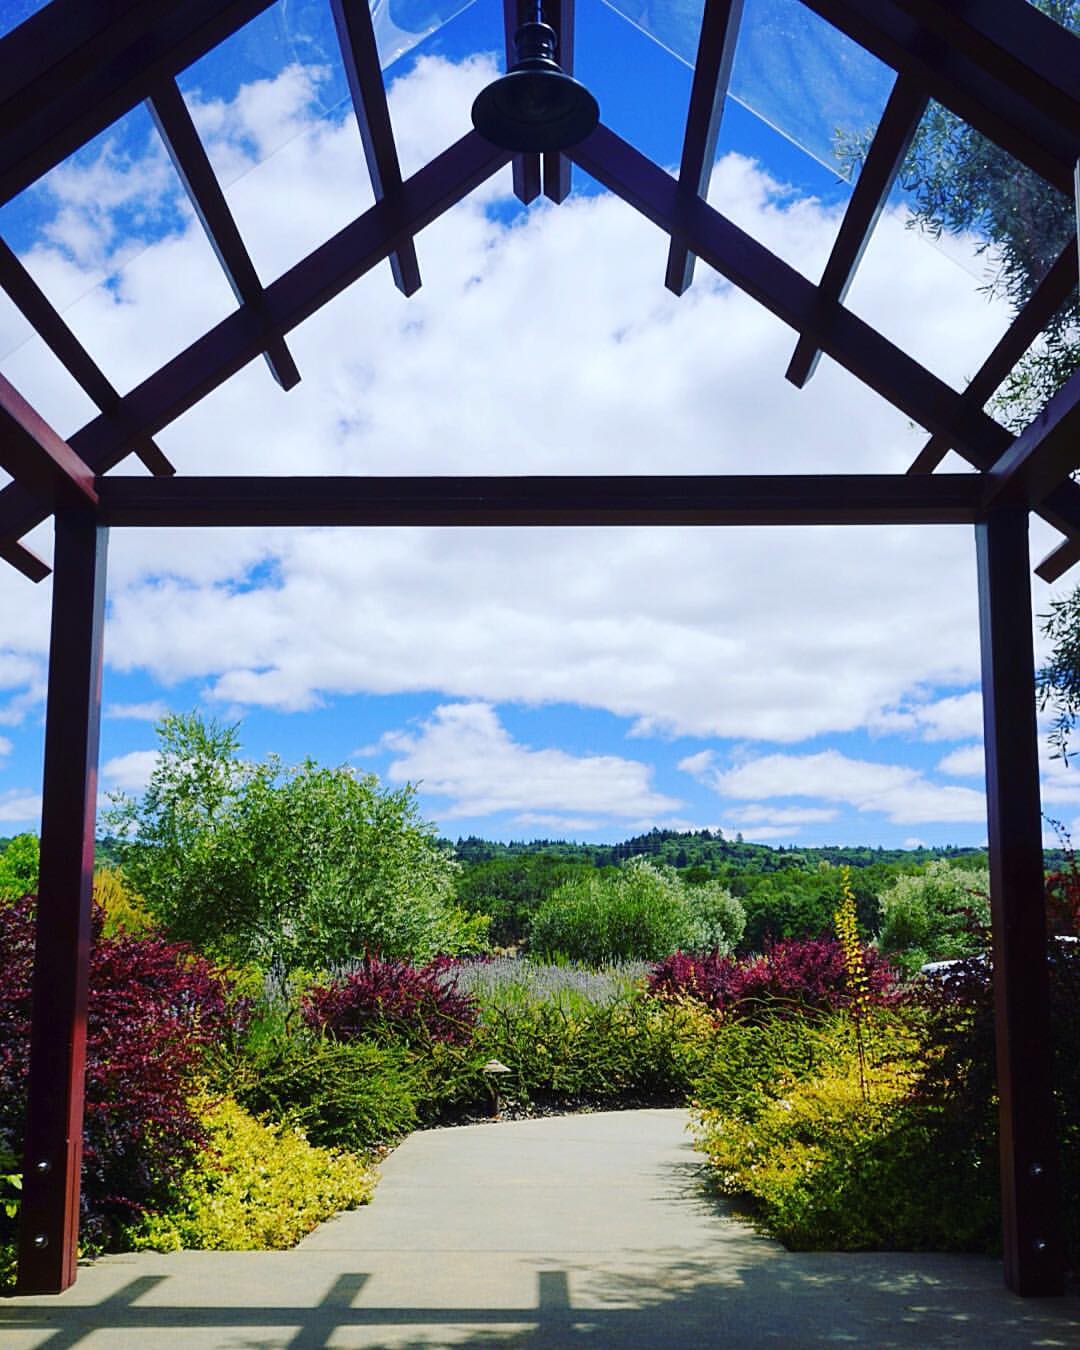 Looking out the entrance of Truett Hurst winery to lush greenery and sunny clouded sky above pergola